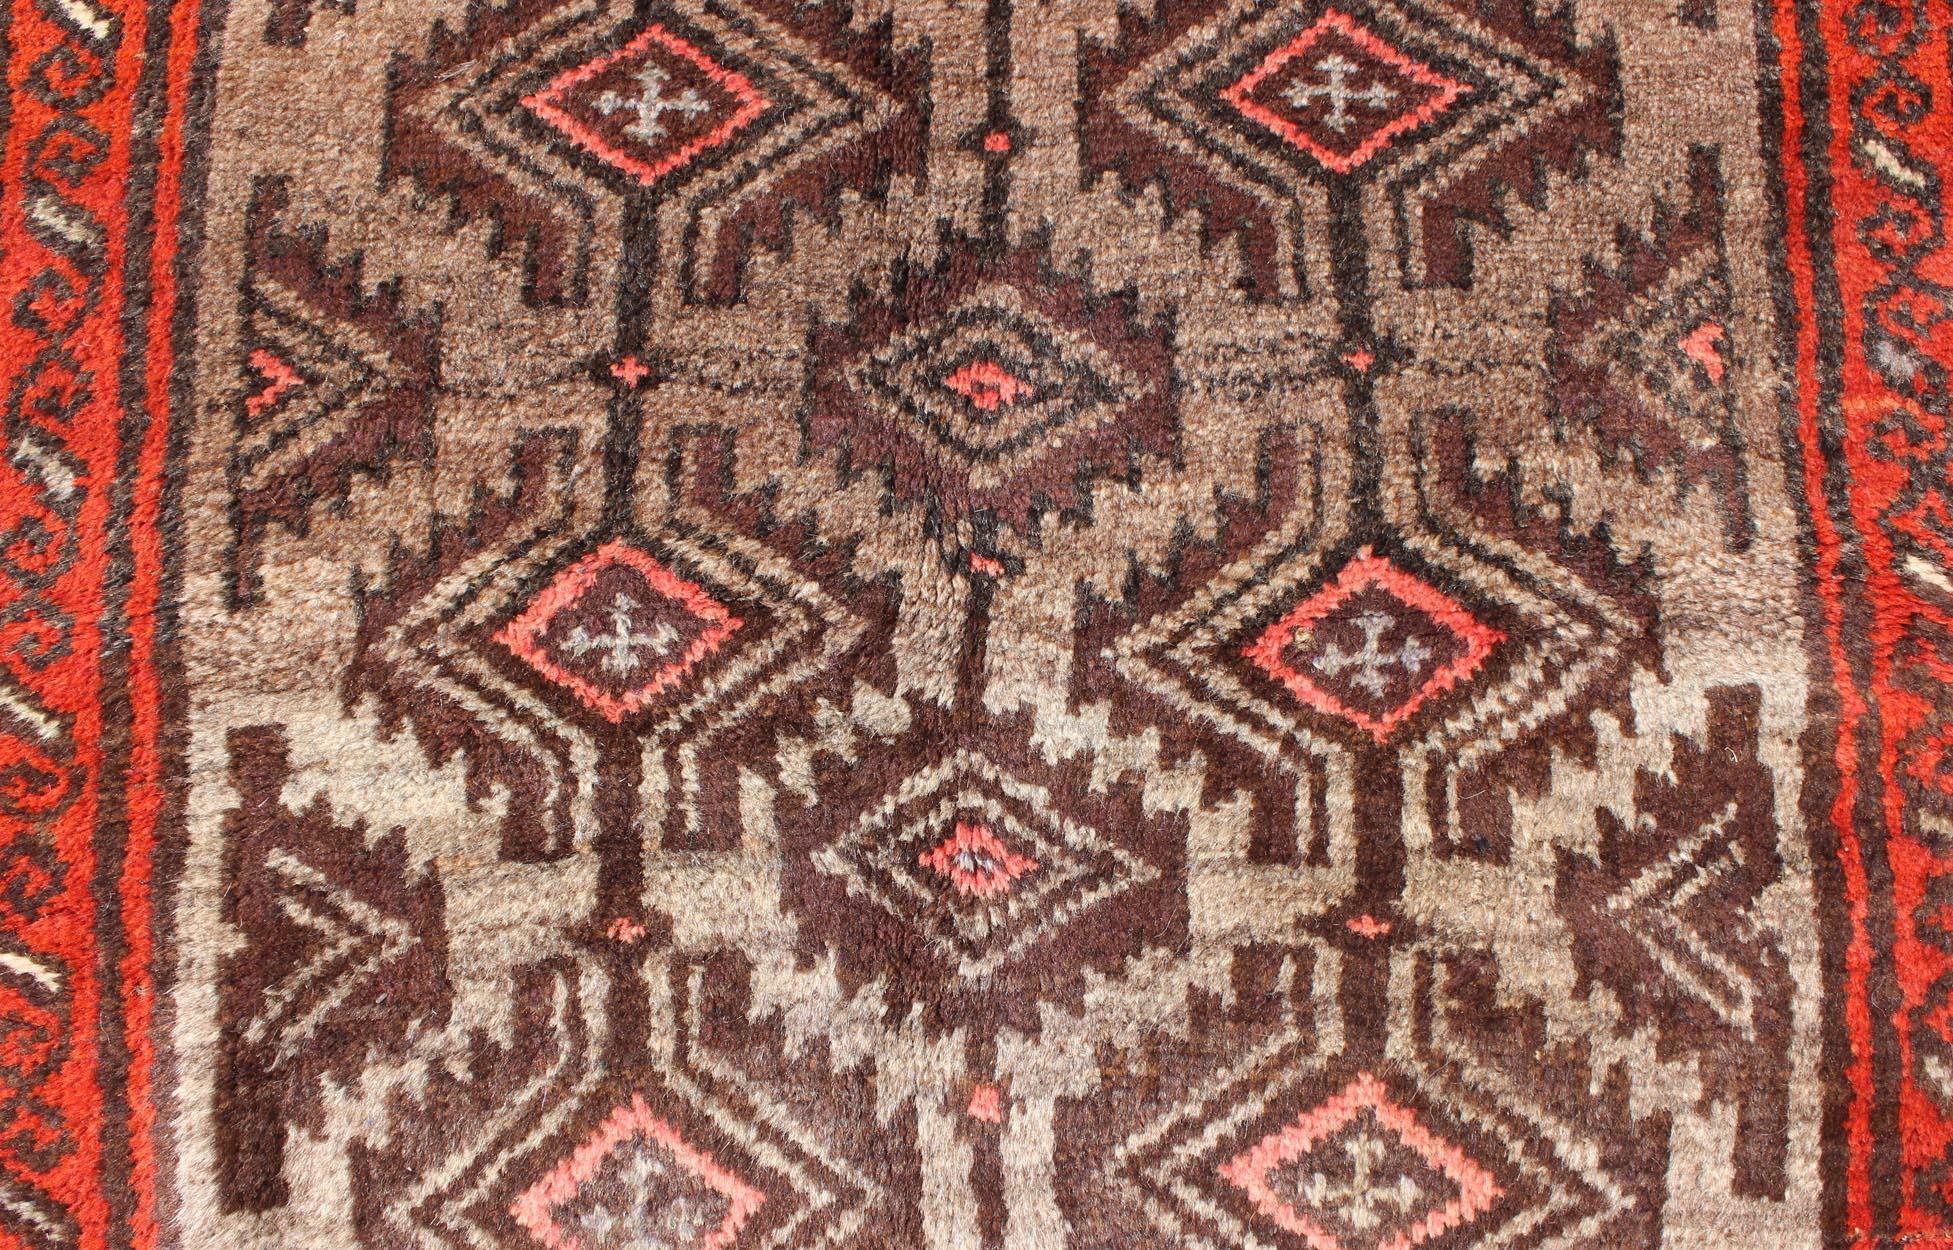 Vintage Persian Shiraz Rug in Burnt Orange and Brown with Tribal Medallions For Sale 2